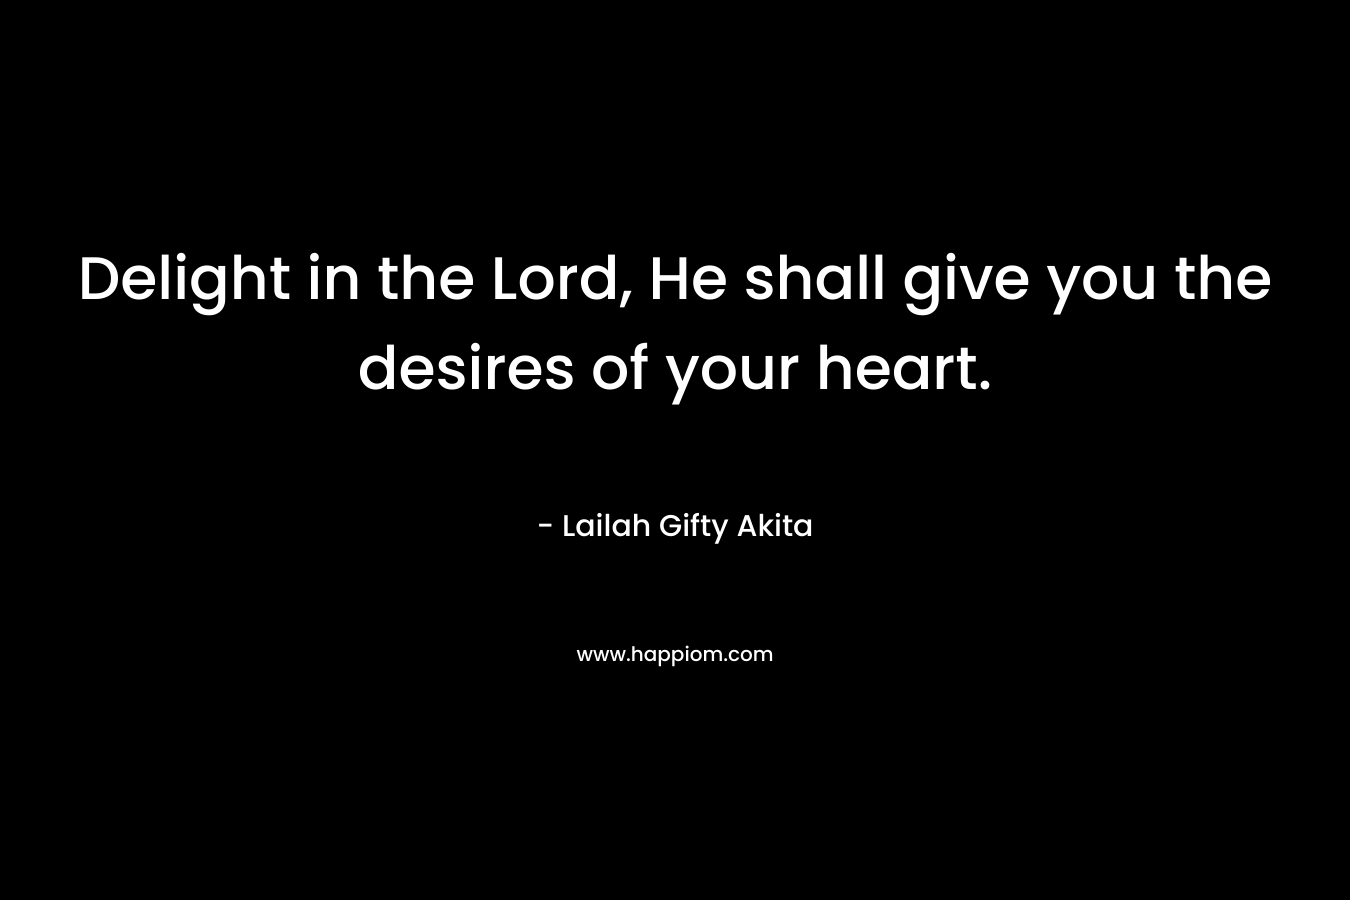 Delight in the Lord, He shall give you the desires of your heart.